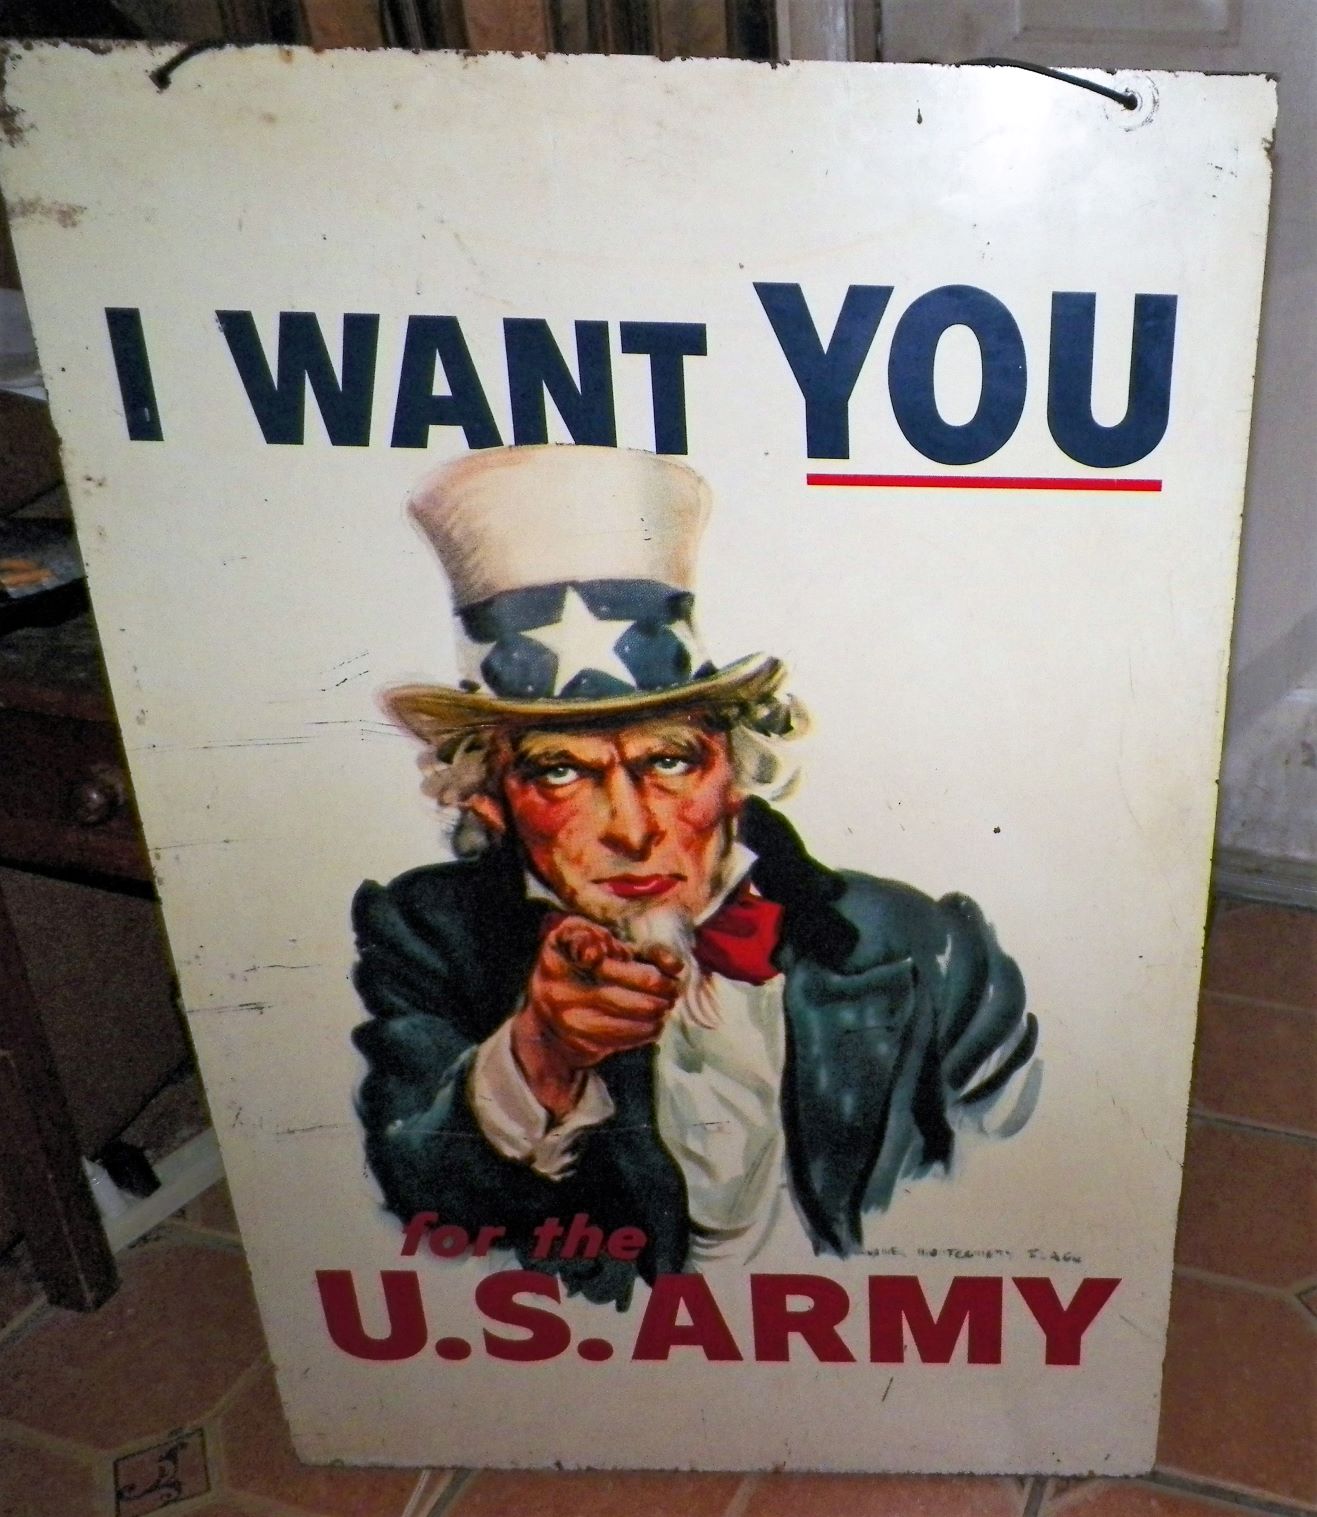 COLLECTIBLE SIGN UNCLE SAM I WANT YOU FOR US ARMY 2 SUDED METAL RECRUITMENT SIGN 1AAZZZ.JPG